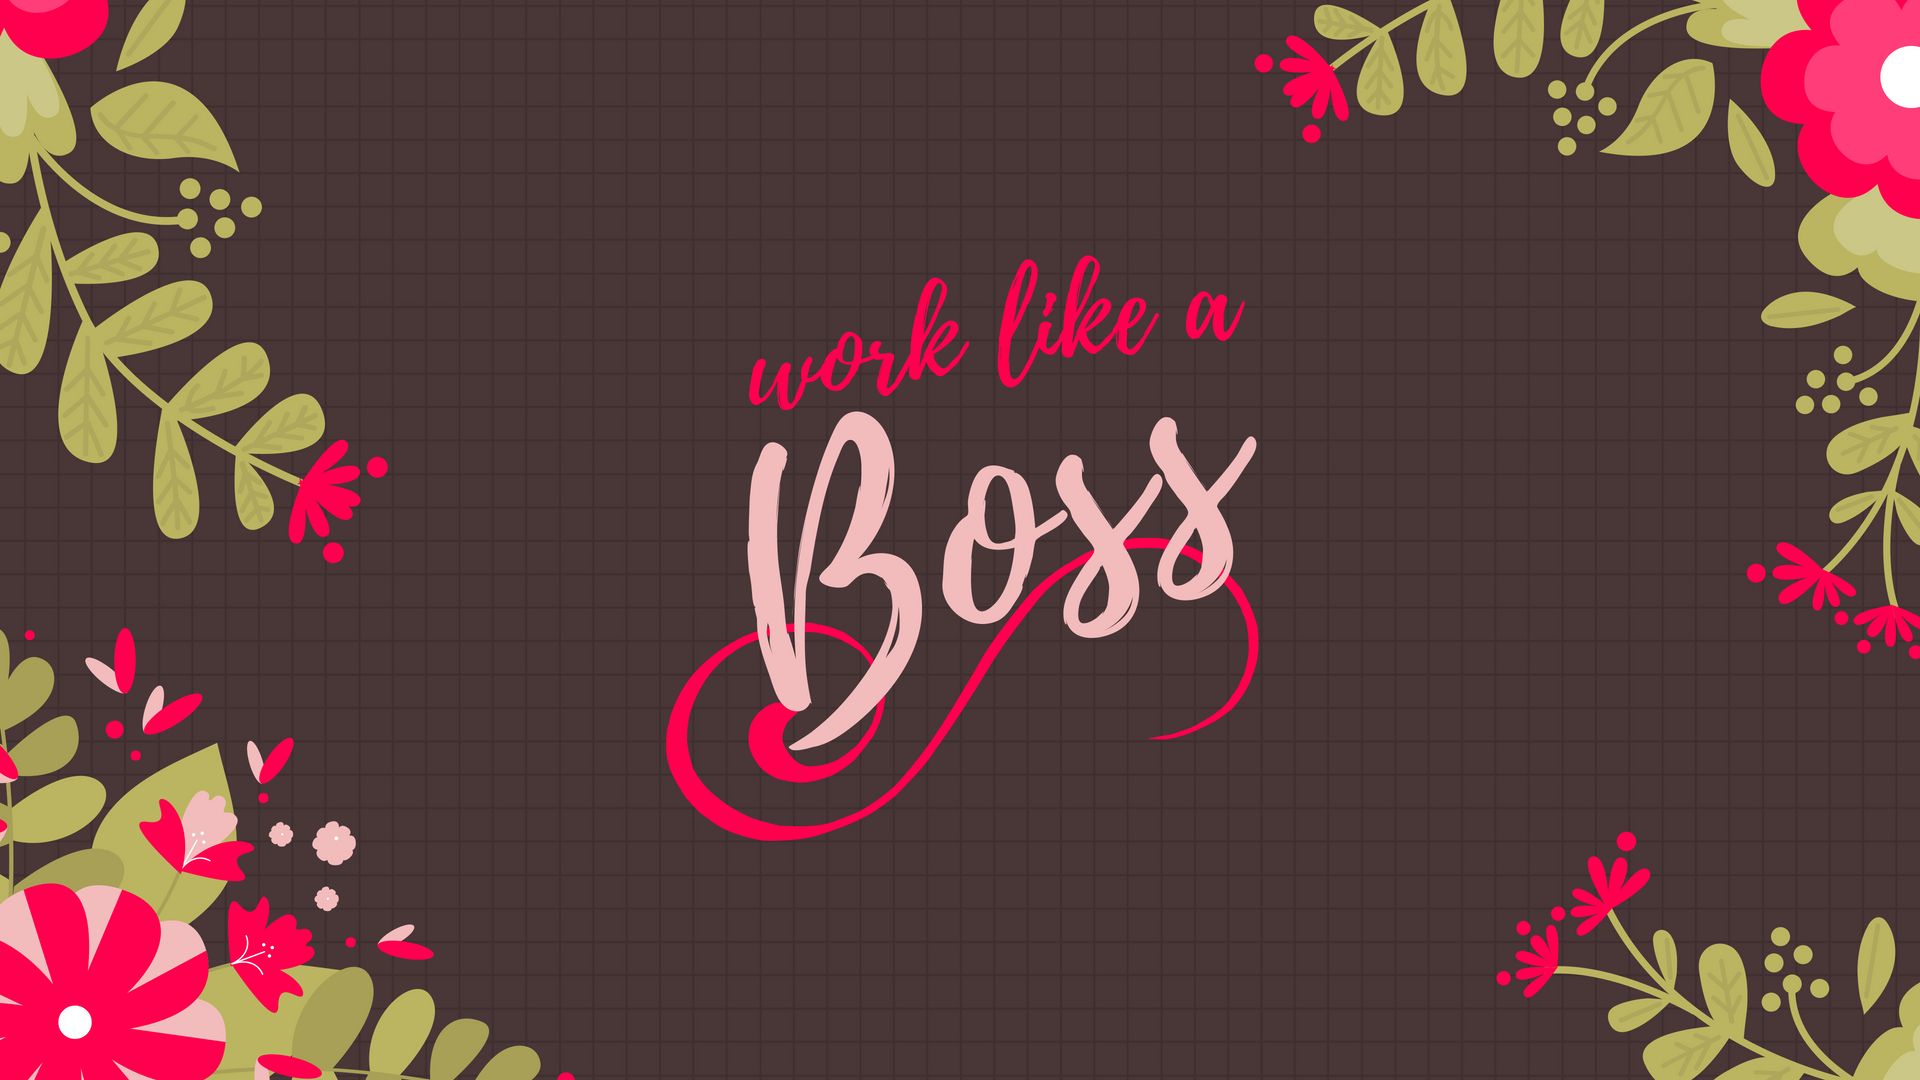 Like A Boss Movie Wallpapers